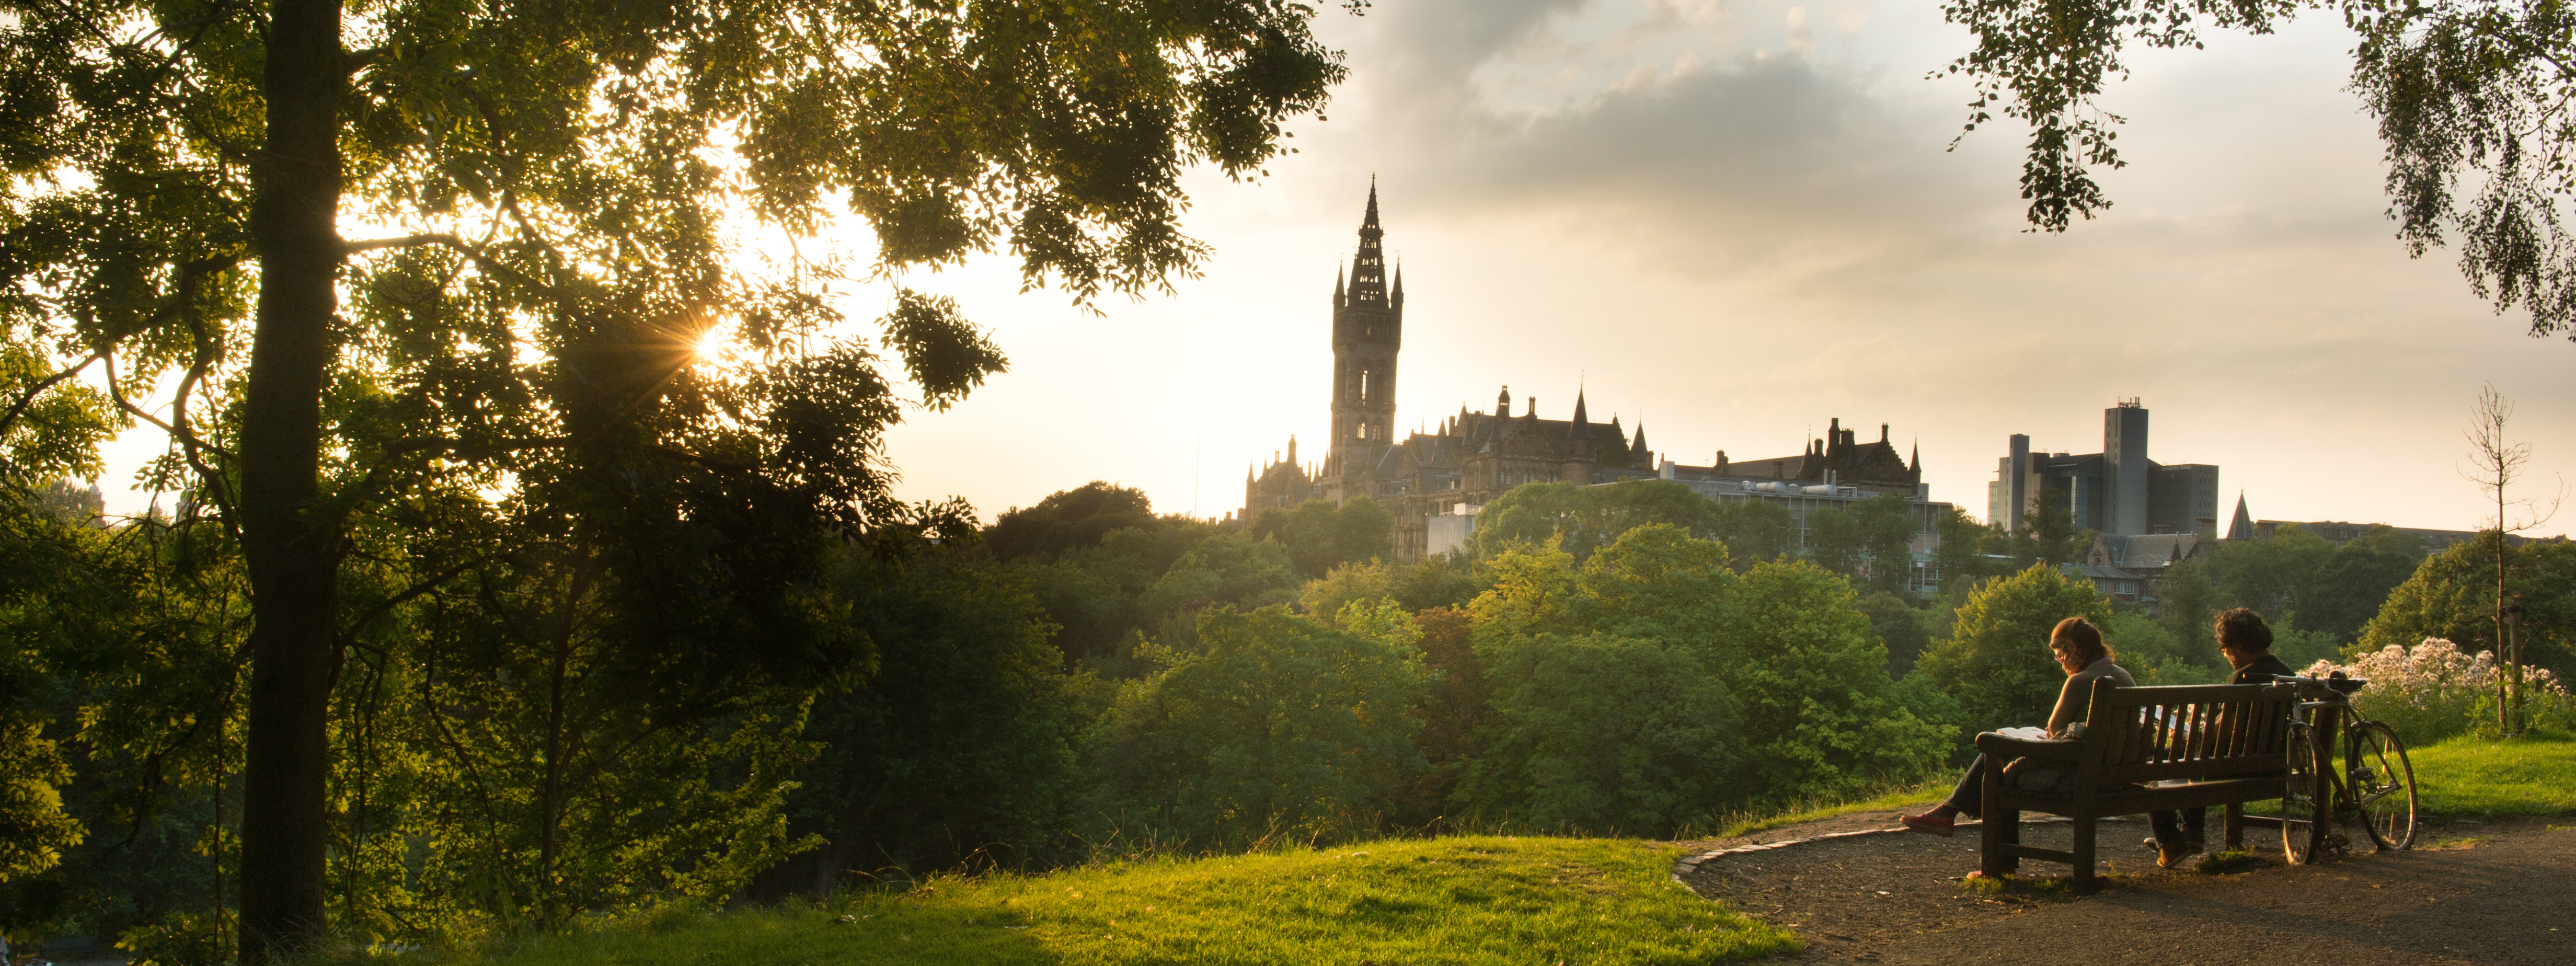 Glasgow University sunset with students on bench